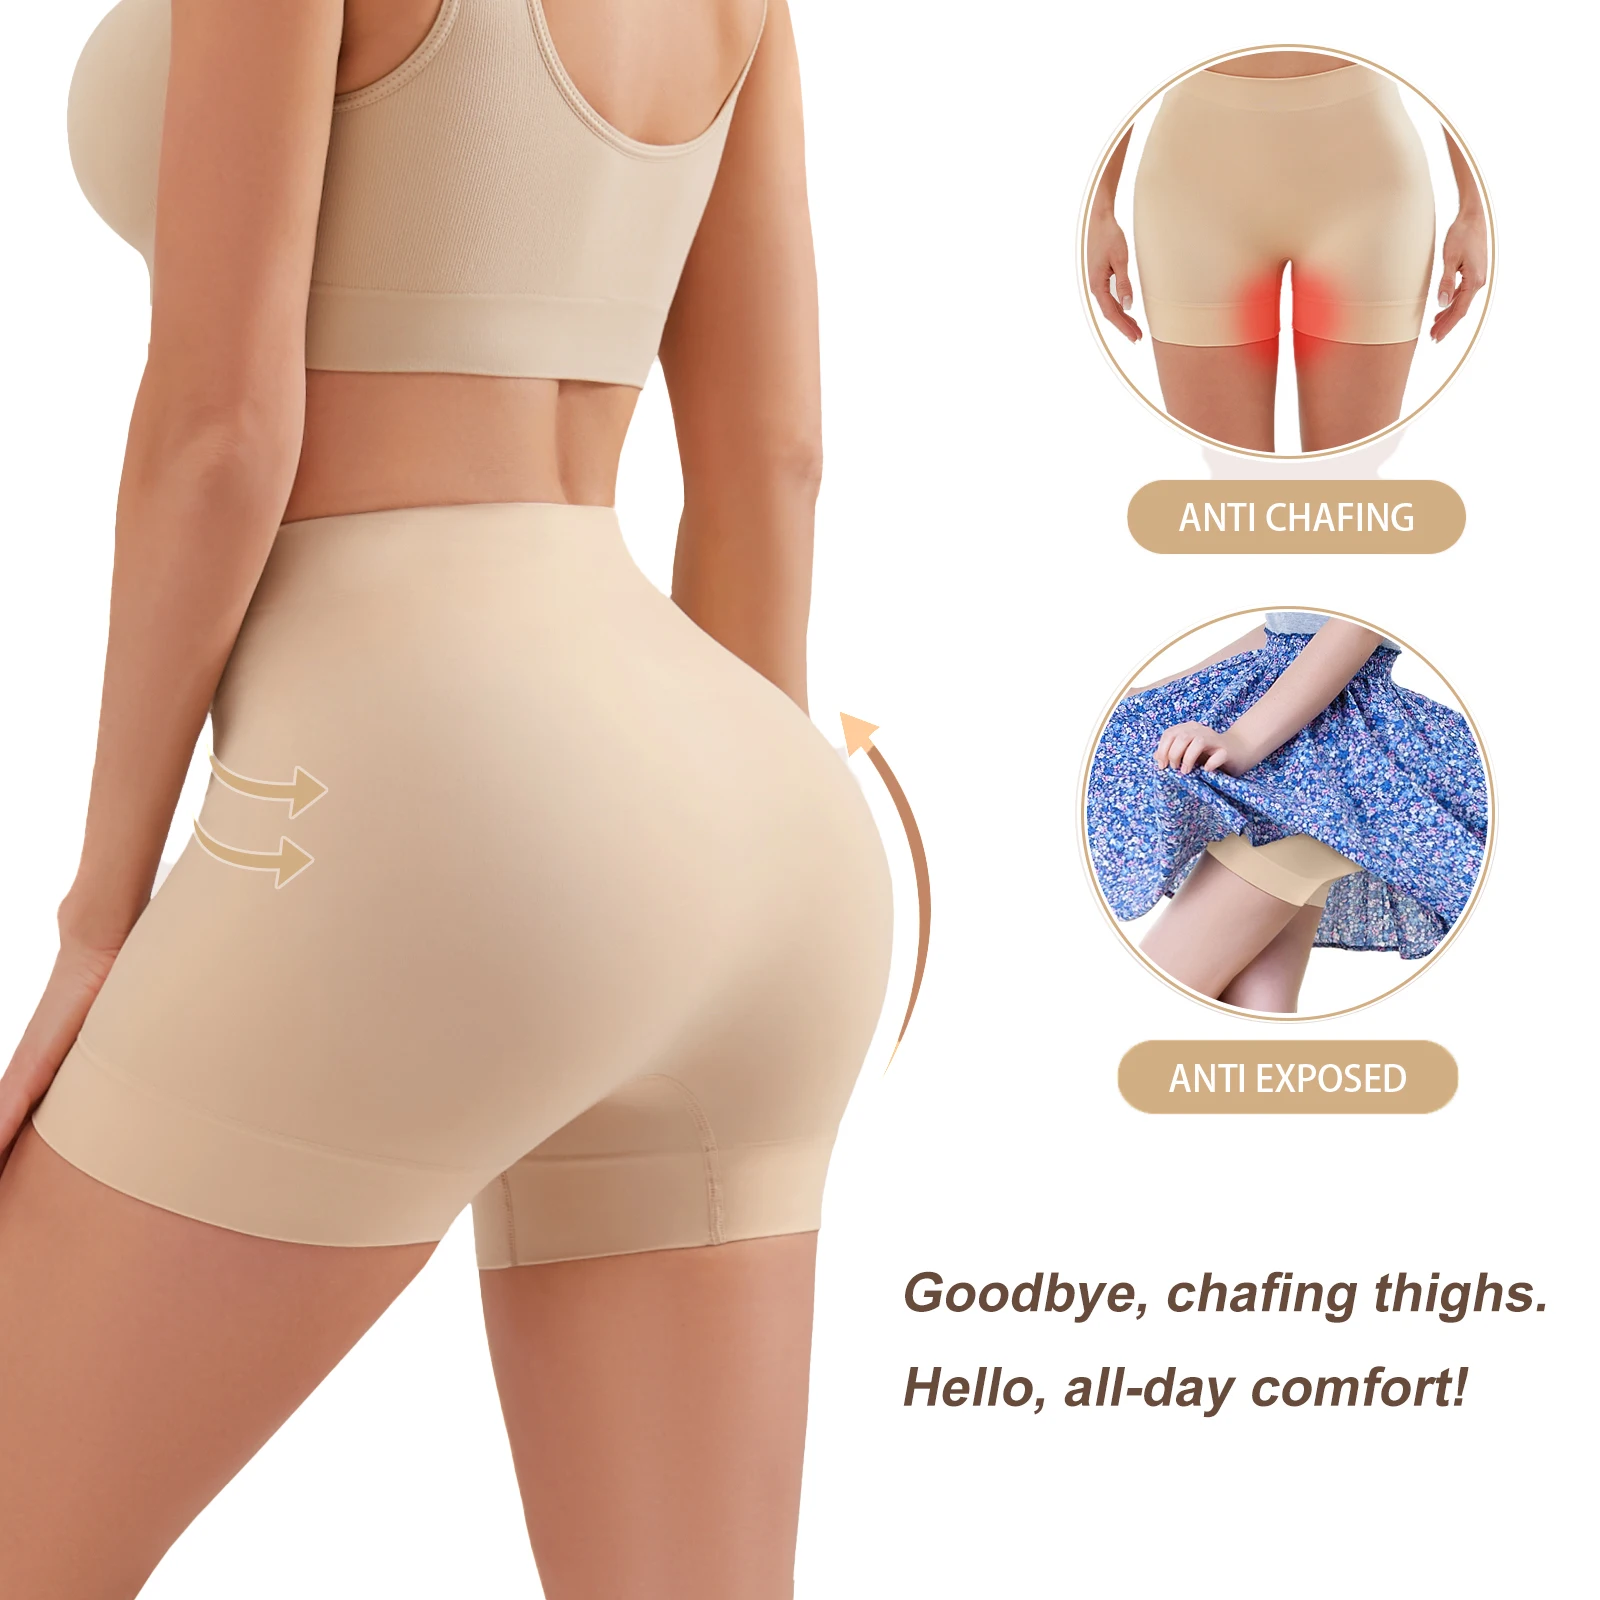 Anti Chafing Slip Shorts for Women High Waist Safety Boyshorts Invisible  Under Dress Seamless Underwear Smooth Control Panties